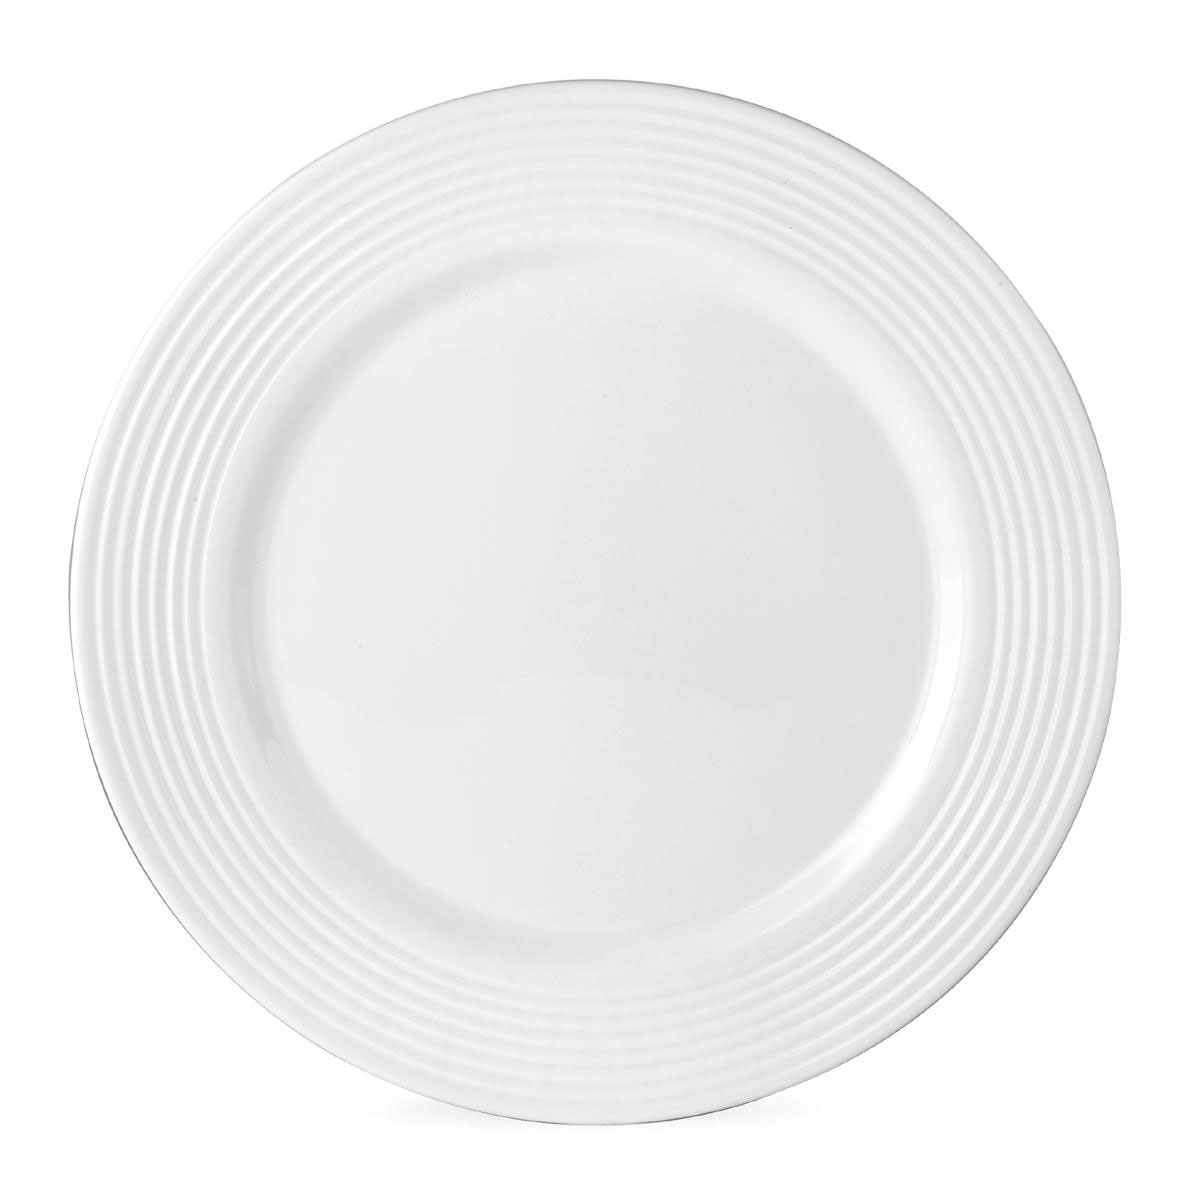 Lenox Tin Can Alley Dinner Plate - 7 Degree